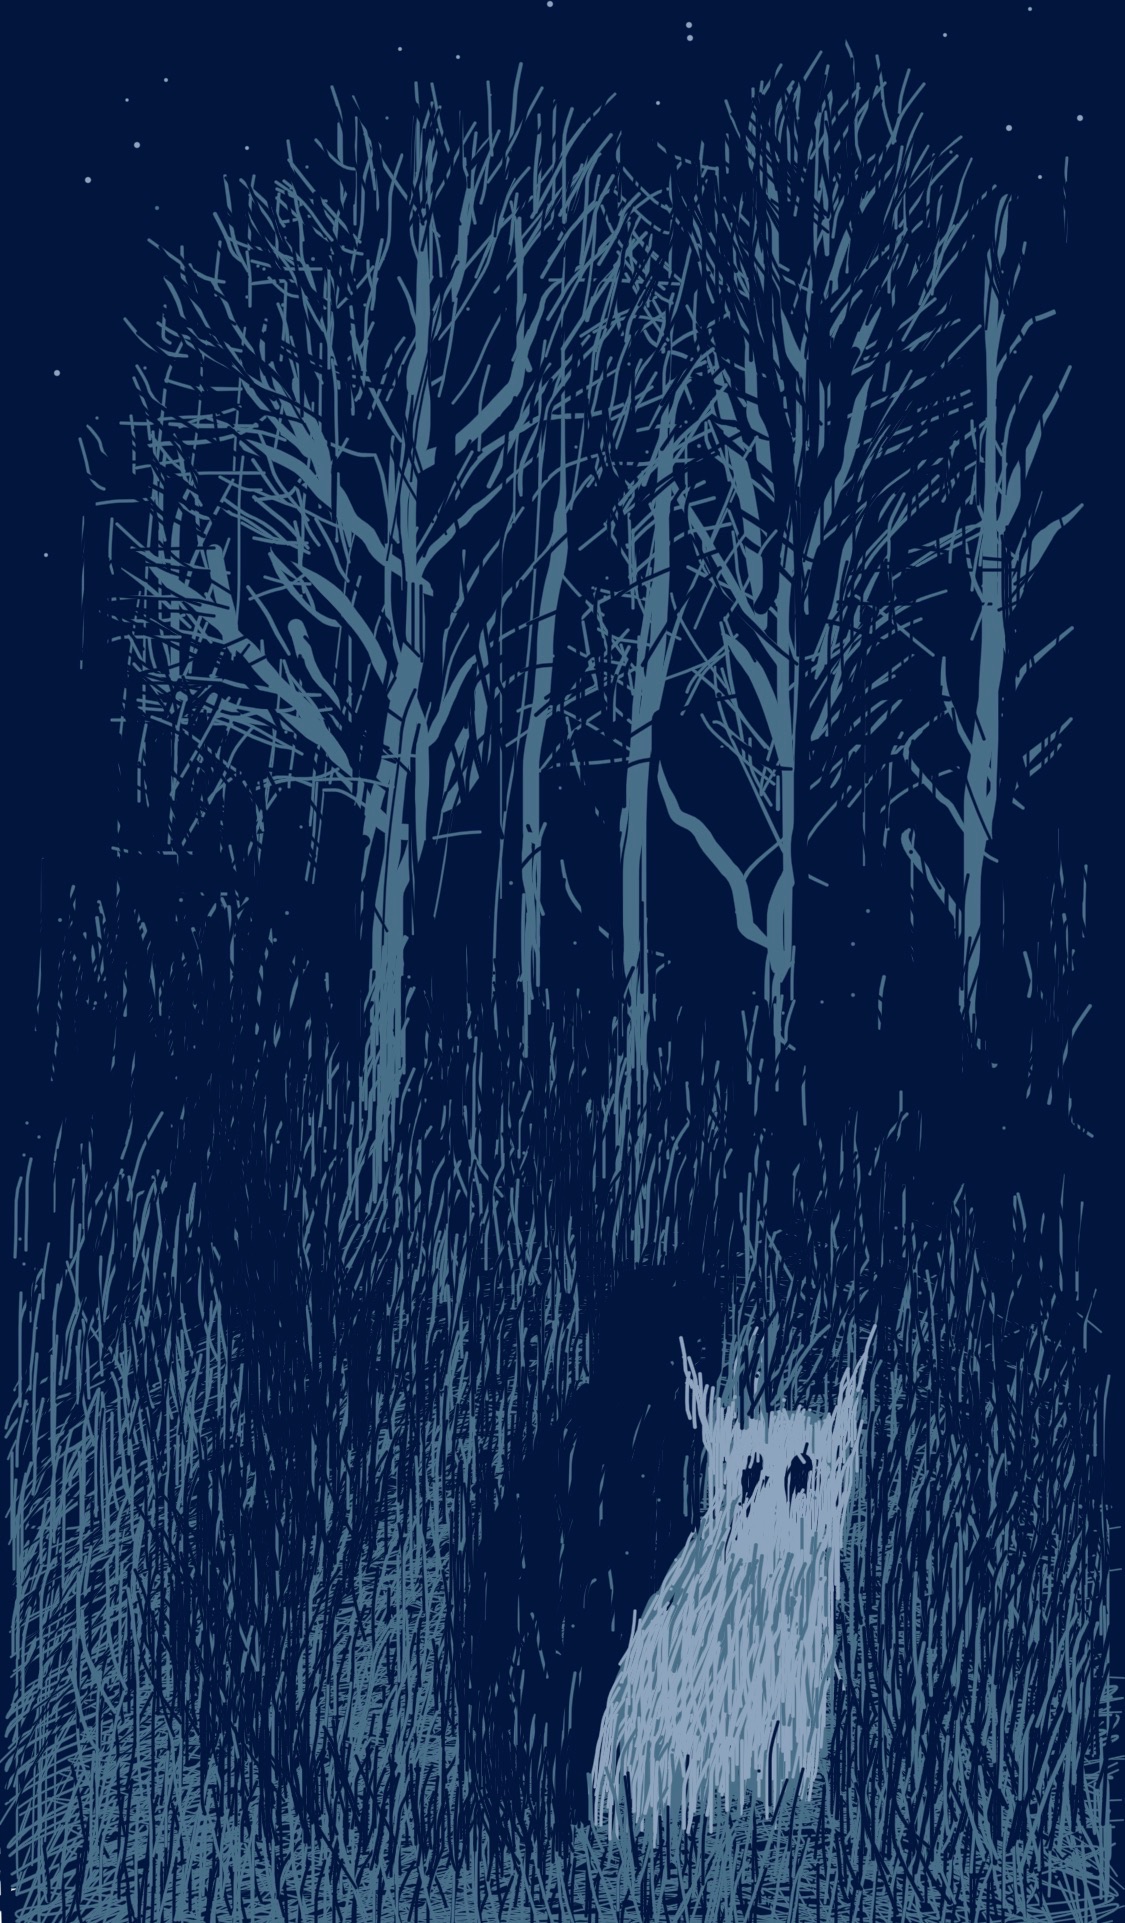 A strange creature in a forest at night, caught in a flashlight beam